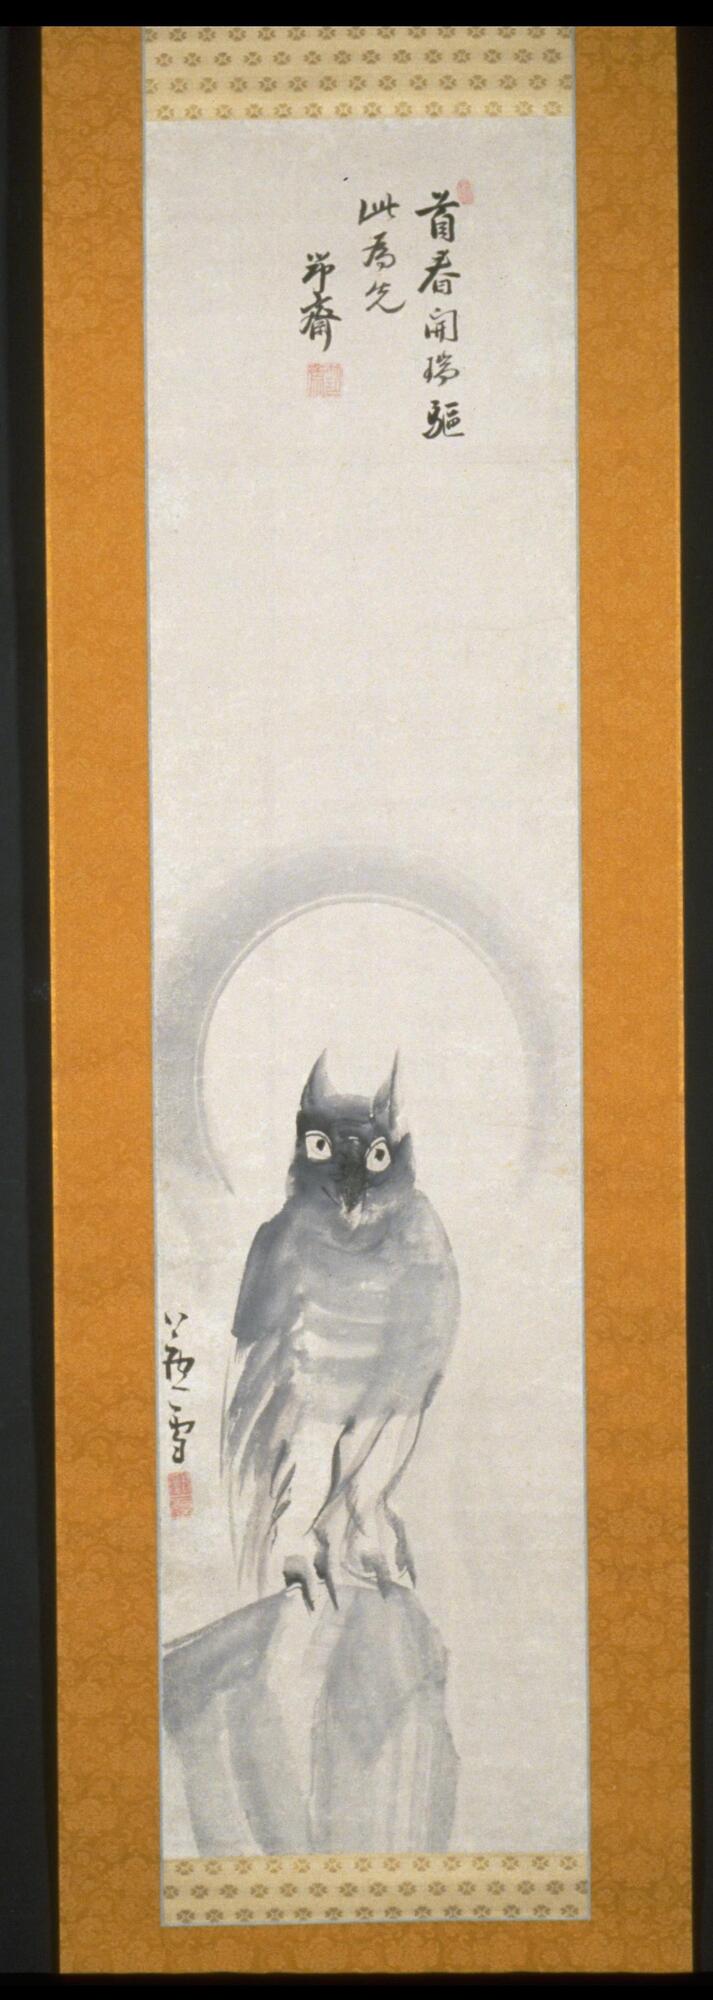 In this hanging scroll, Rosetsu depicts an owl perched on a rock in front of a large moon hanging low in the sky. The soft washes and quick brushstrokes used in the image create an overall sense of airiness, but maintain a clear sense of naturalism in depicting the owl's anatomy. 